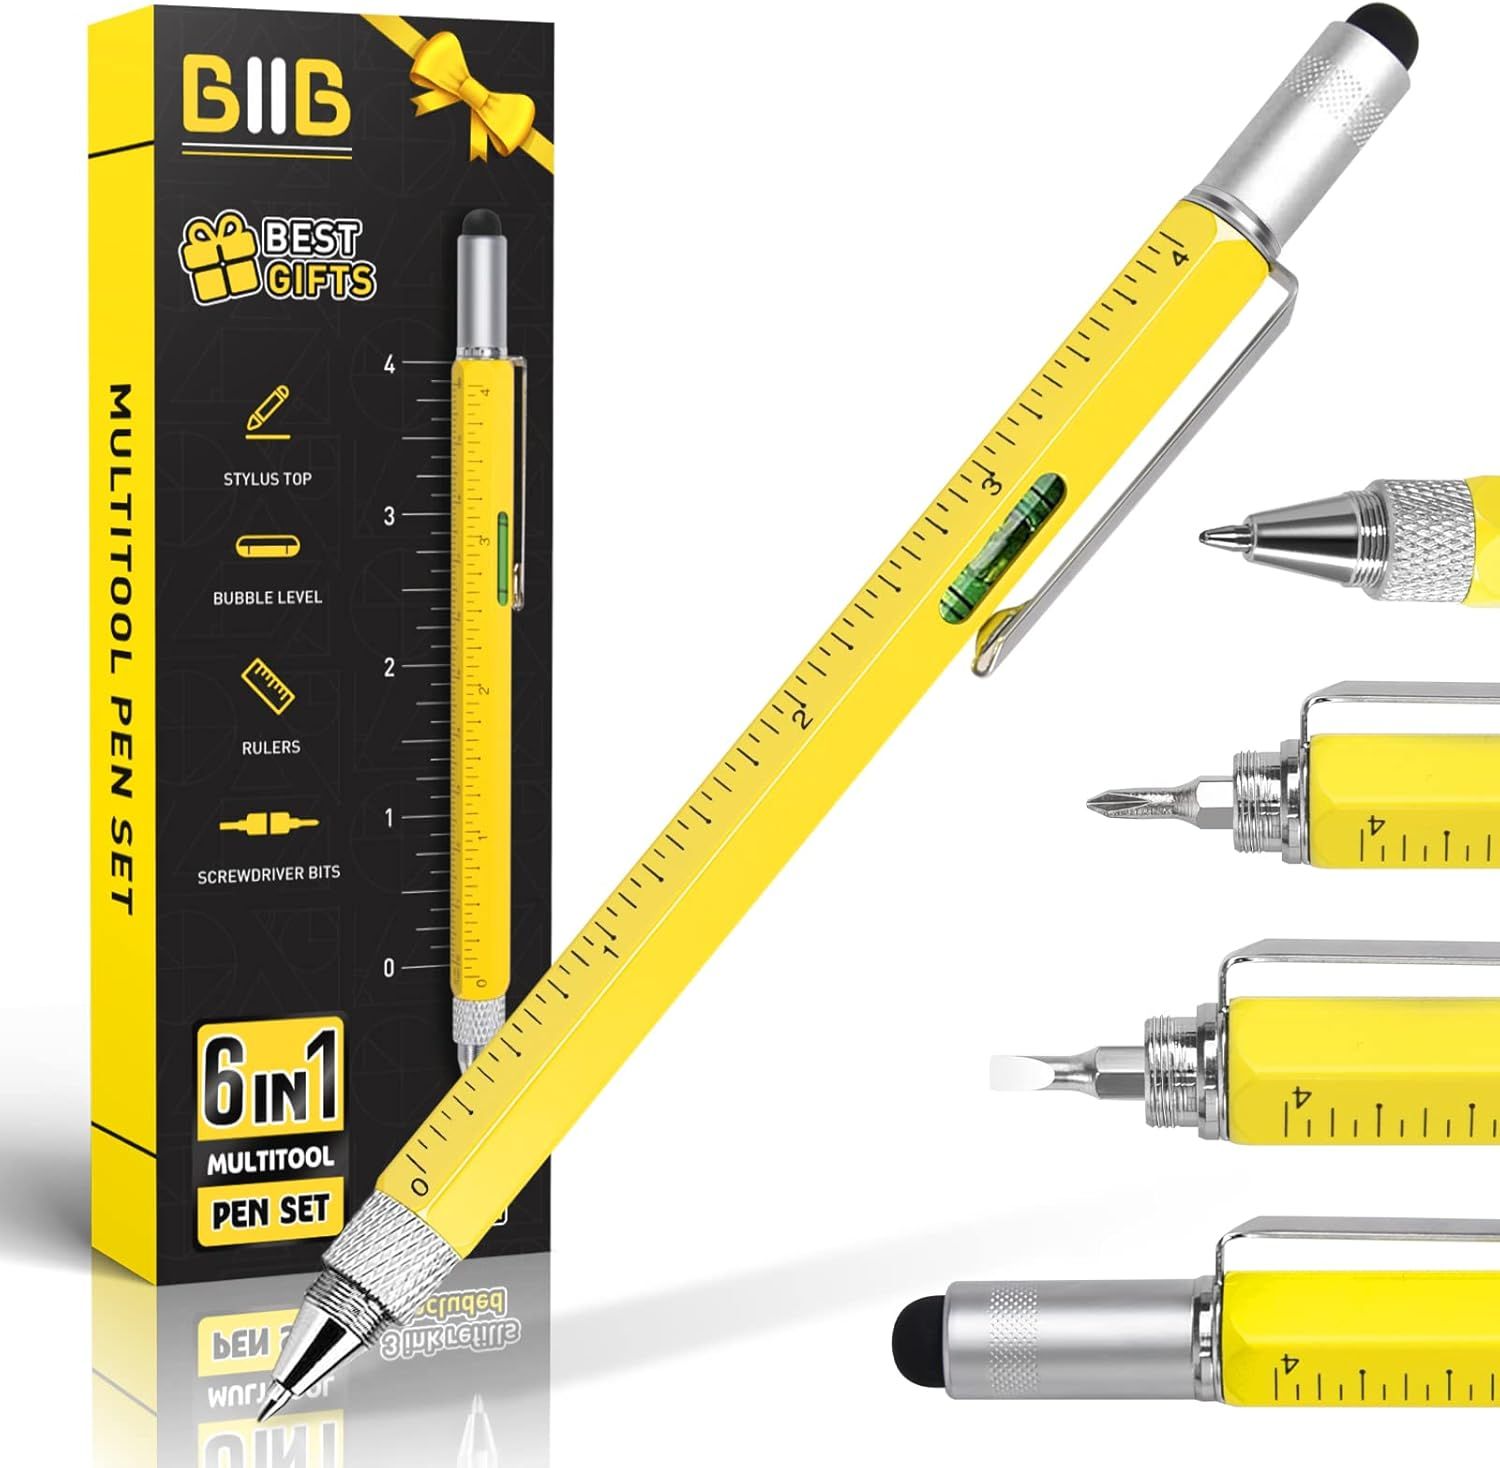 BIIB Gifts for Men, Stocking Stuffers for Men, 6 in 1 Multitool Pen Tools Gadgets for Men, Unique... | Amazon (US)